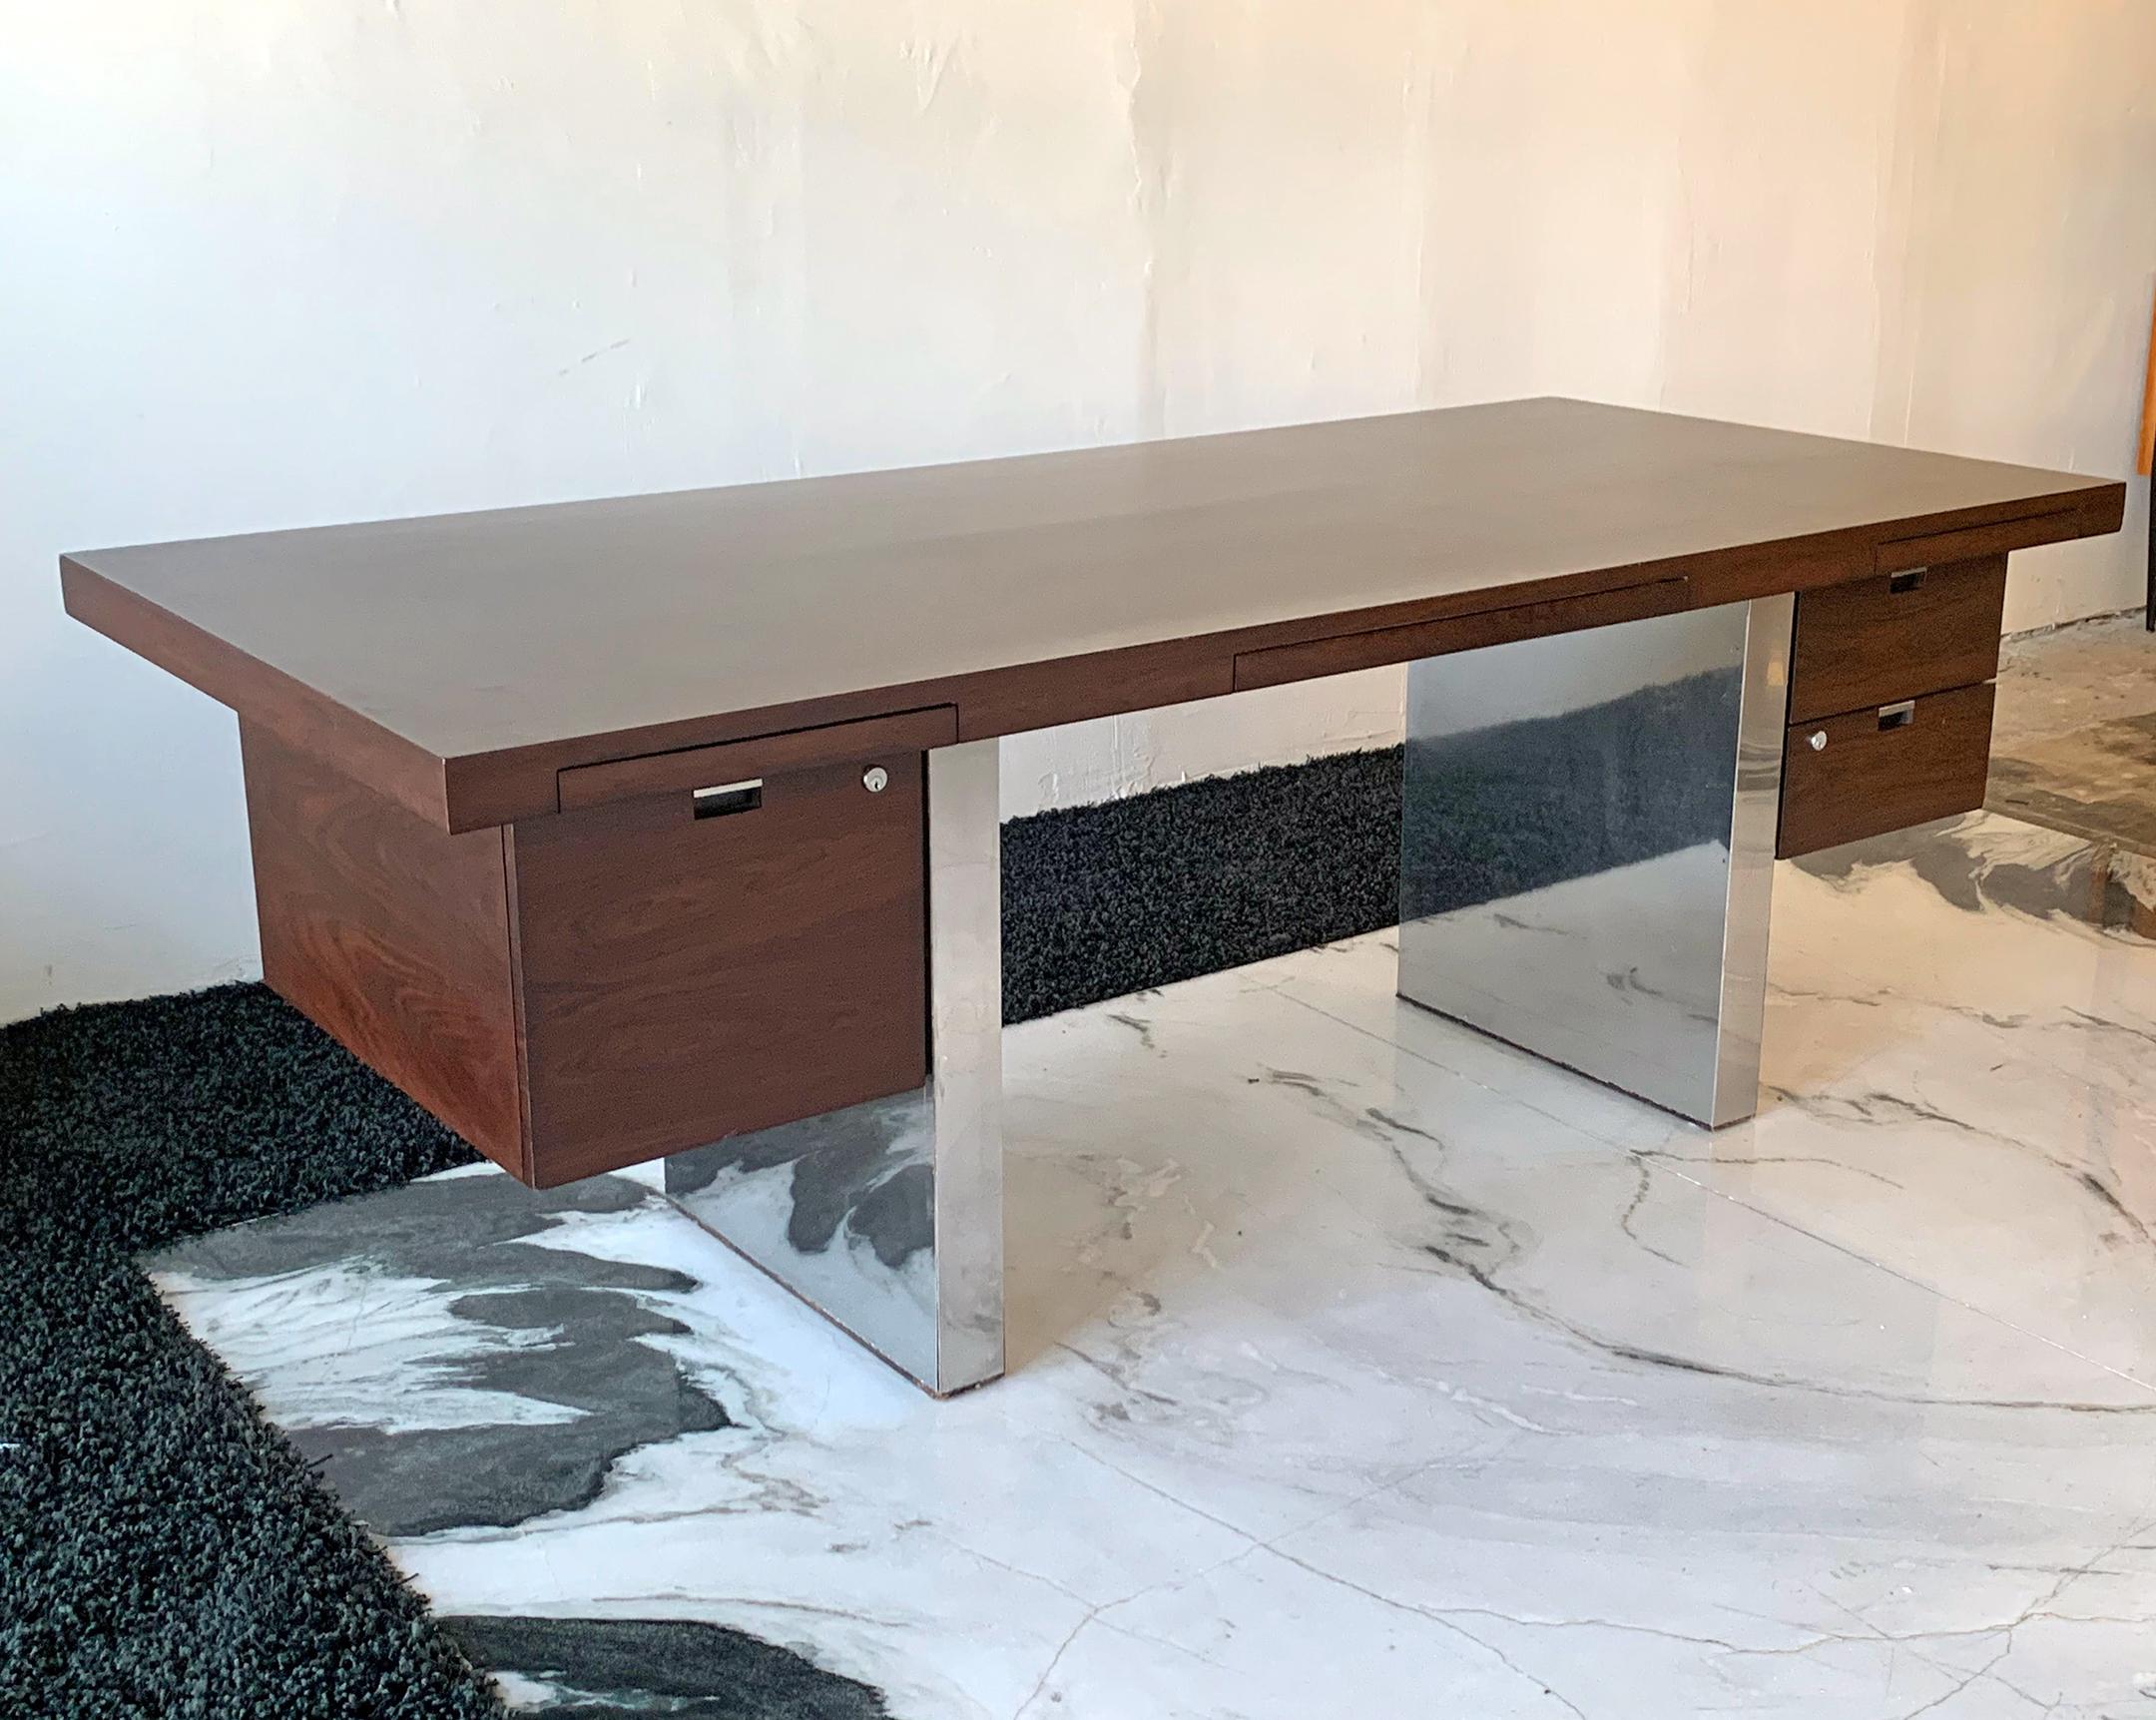 Some pieces of furniture have a vibe all their own; this desk is one of those pieces. Clad in rosewood and polished stainless steel (chrome), this desk epitomizes midcentury luxury. It's bold, timeless design would compliment any type of